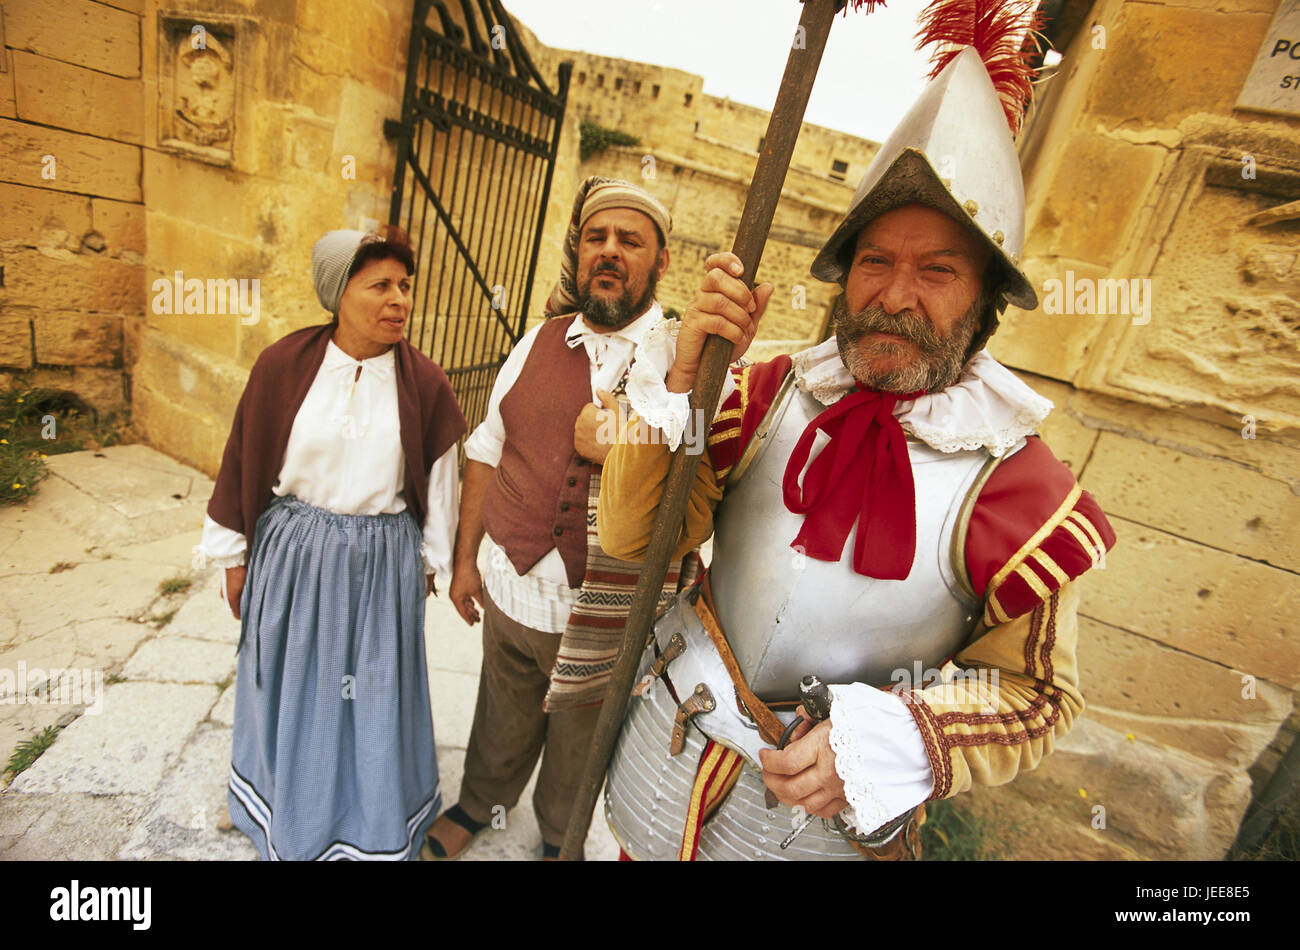 Island Malta, peninsula Sciberras, Valletta, fort piece Elmo, military save, actor, costumes, historically, no model release, Maltese islands, Mediterranean island, capital, culture, UNESCO-world cultural heritage, structure, fortress, bastion, showing, show, Guardia save, person, pawn, guard, soldier, tradition, tourism, place of interest, outside, Stock Photo